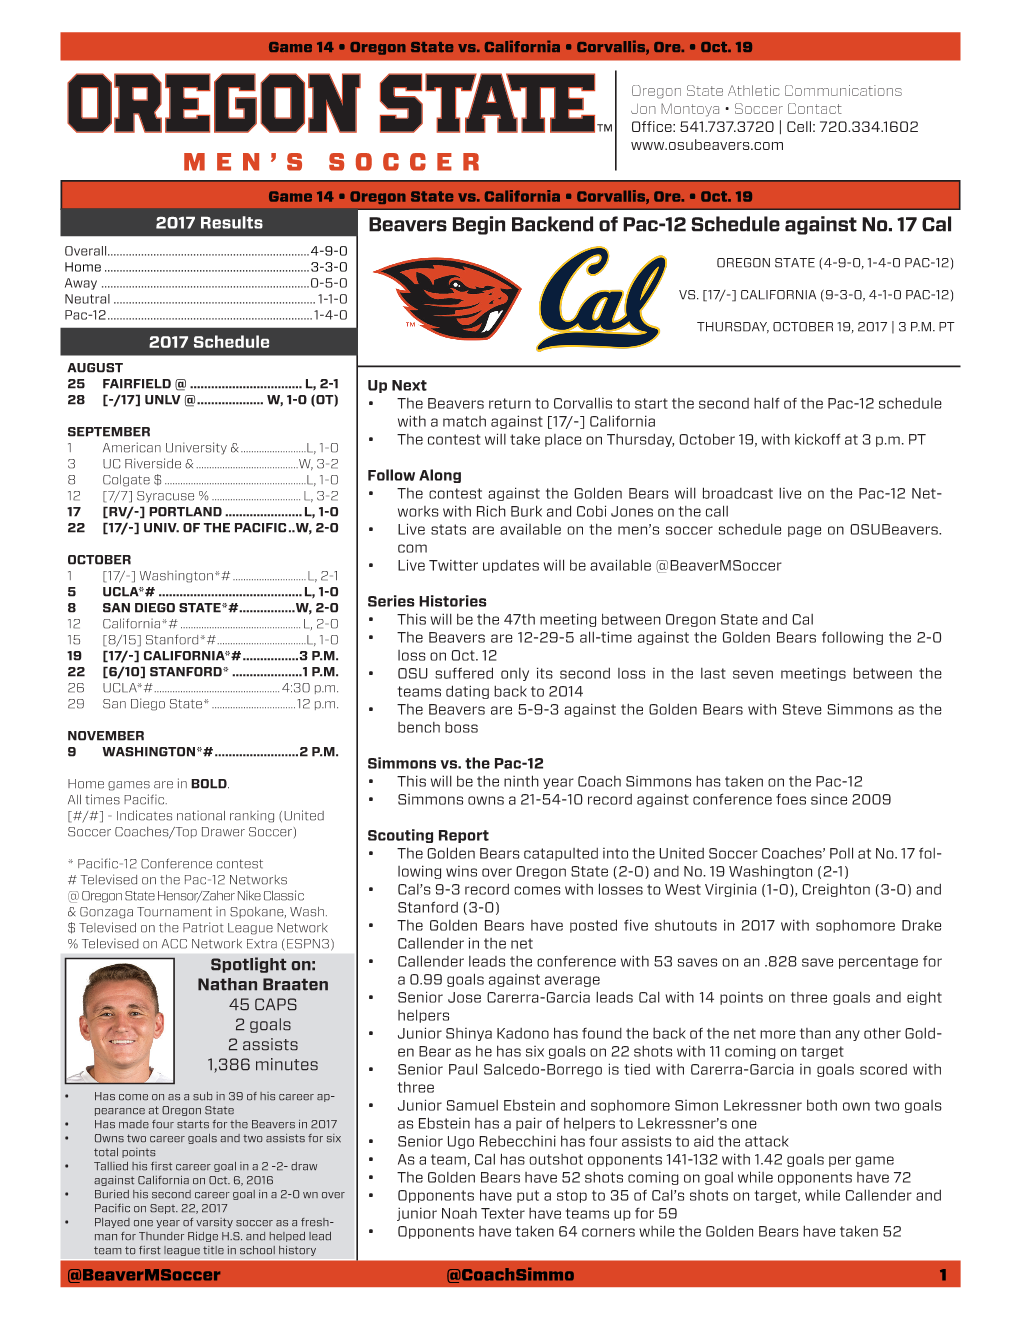 Beavers Begin Backend of Pac-12 Schedule Against No. 17 Cal Overall